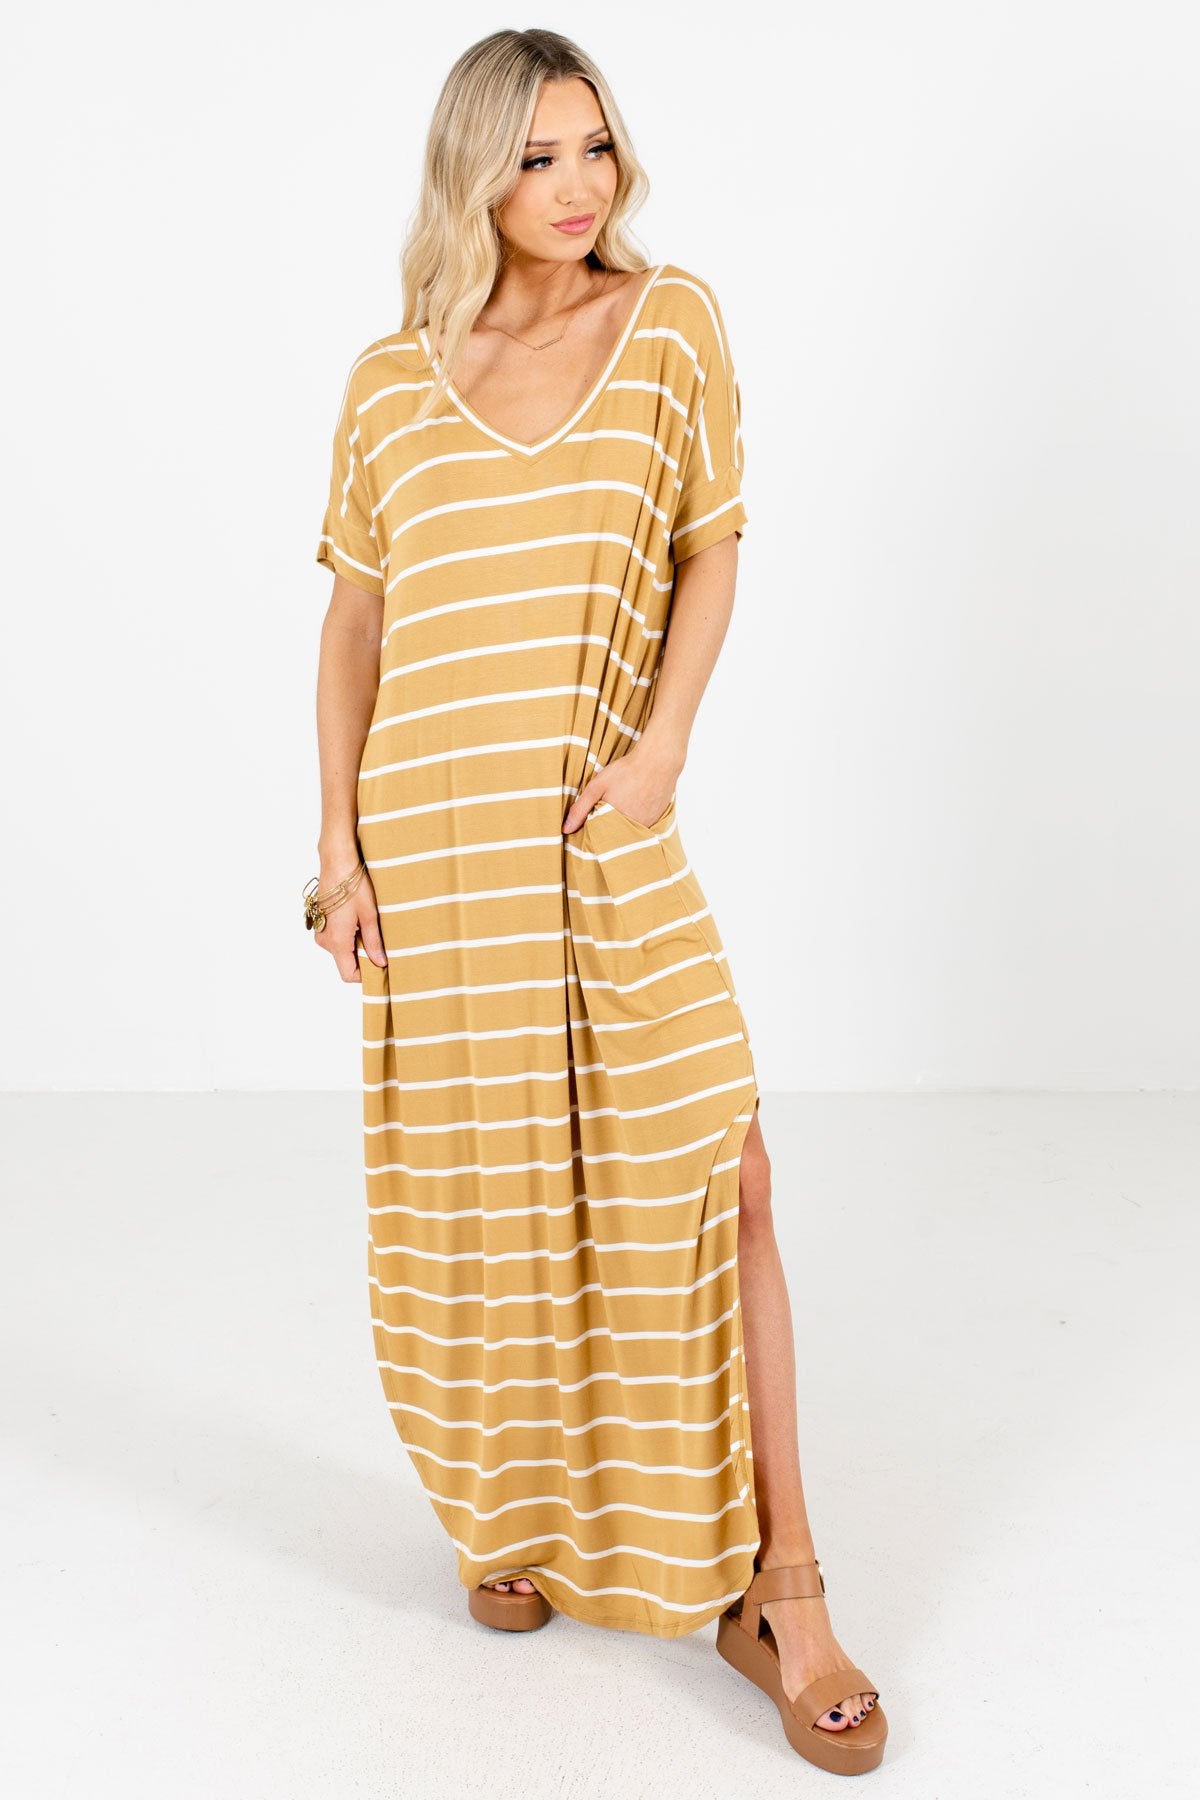 Yellow and White Striped Boutique Maxi Dresses for Women